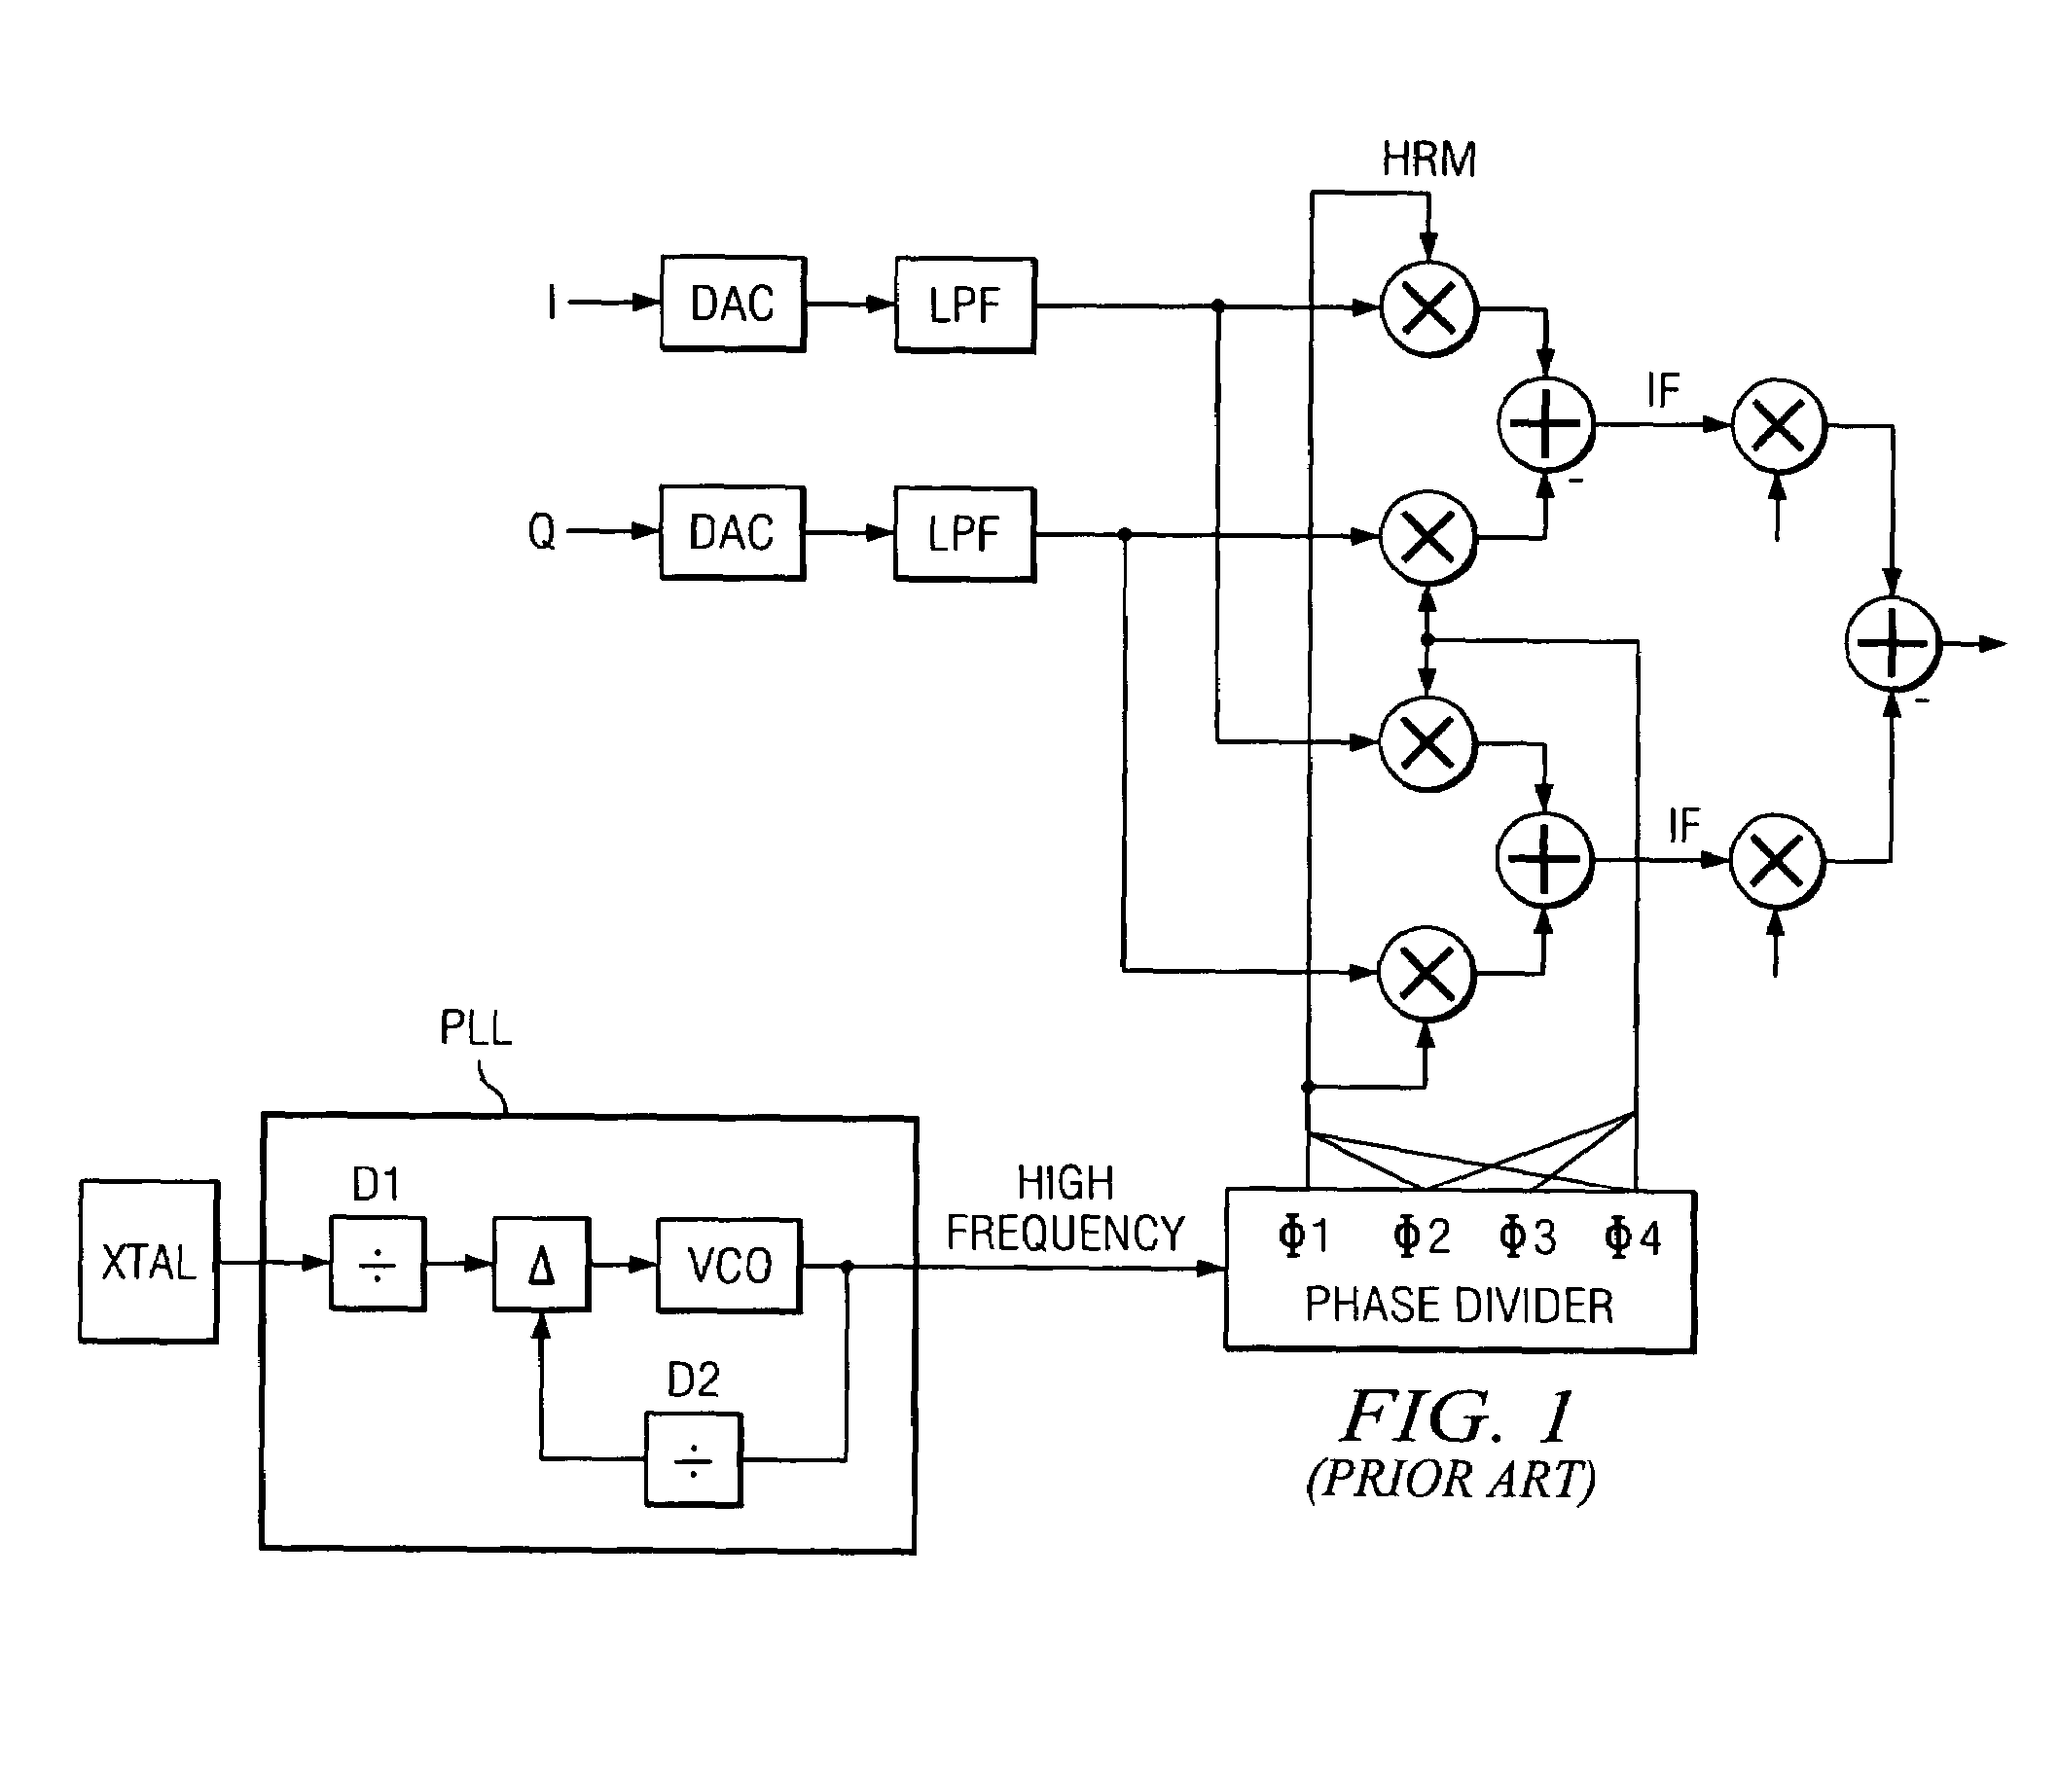 Current interpolation in multi-phase local oscillator for use with harmonic rejection mixer